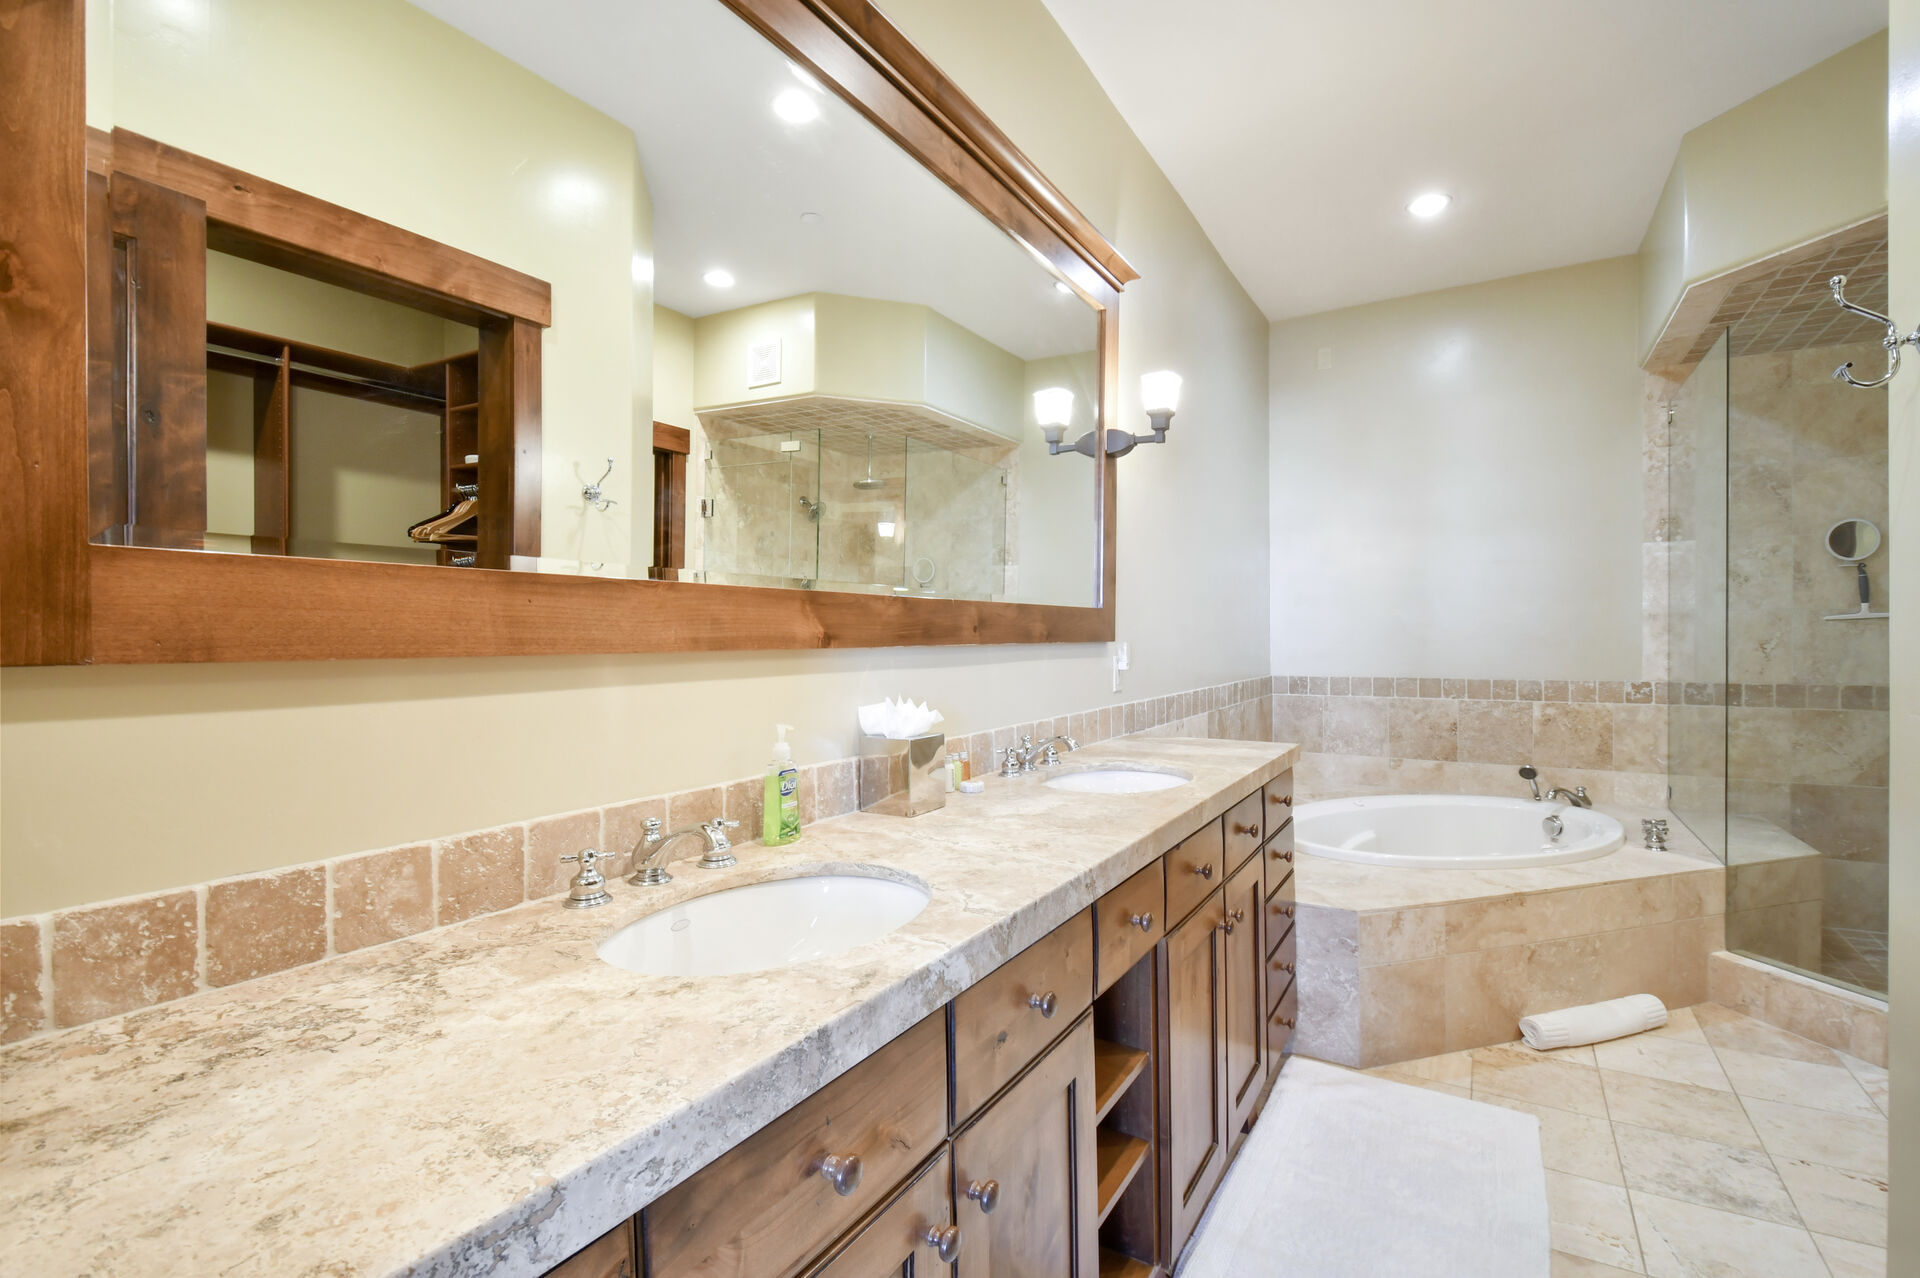 Master bathroom. Oversize luxury with jacuzzi tub and separate shower.